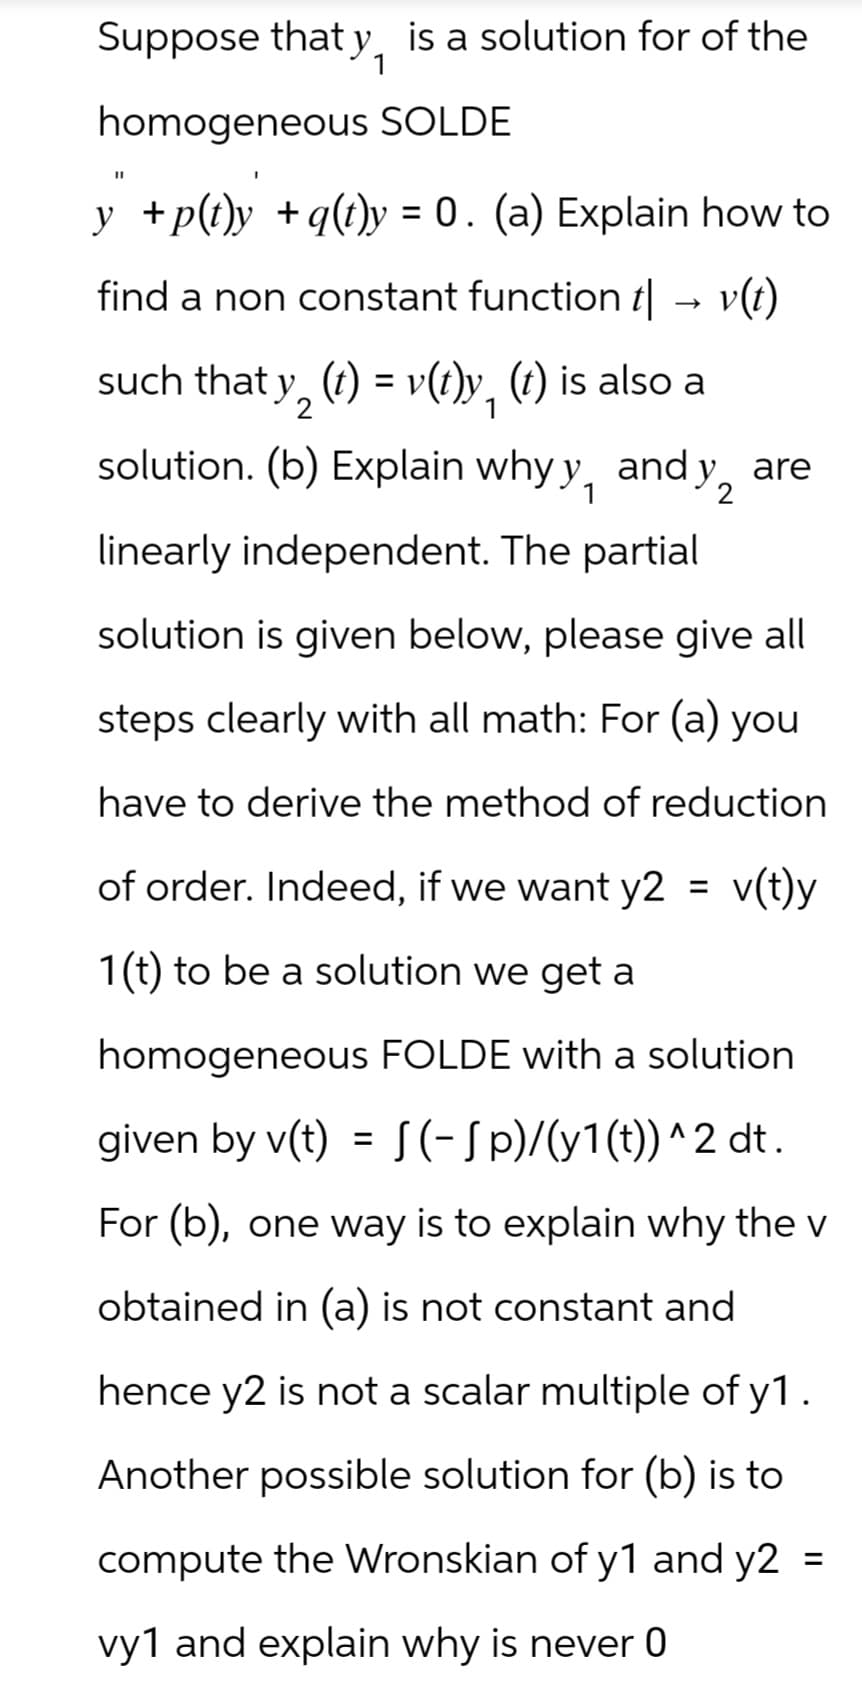 Suppose that y, is a solution for of the
homogeneous SOLDE
"I
y" +p(t)y +q(t)y = 0. (a) Explain how to
find a non constant function t| → v(t)
->
such that y2 (t) = v(t)y, (t) is also a
solution. (b) Explain why y, and y2
linearly independent. The partial
are
solution is given below, please give all
steps clearly with all math: For (a) you
have to derive the method of reduction
of order. Indeed, if we want y2 = v(t)y
1(t) to be a solution we get a
homogeneous FOLDE with a solution
given by v(t) = (-Sp)/(y1(t))^2 dt.
For (b), one way is to explain why the v
obtained in (a) is not constant and
hence y2 is not a scalar multiple of y1.
Another possible solution for (b) is to
compute the Wronskian of y1 and y2
vy1 and explain why is never 0
=